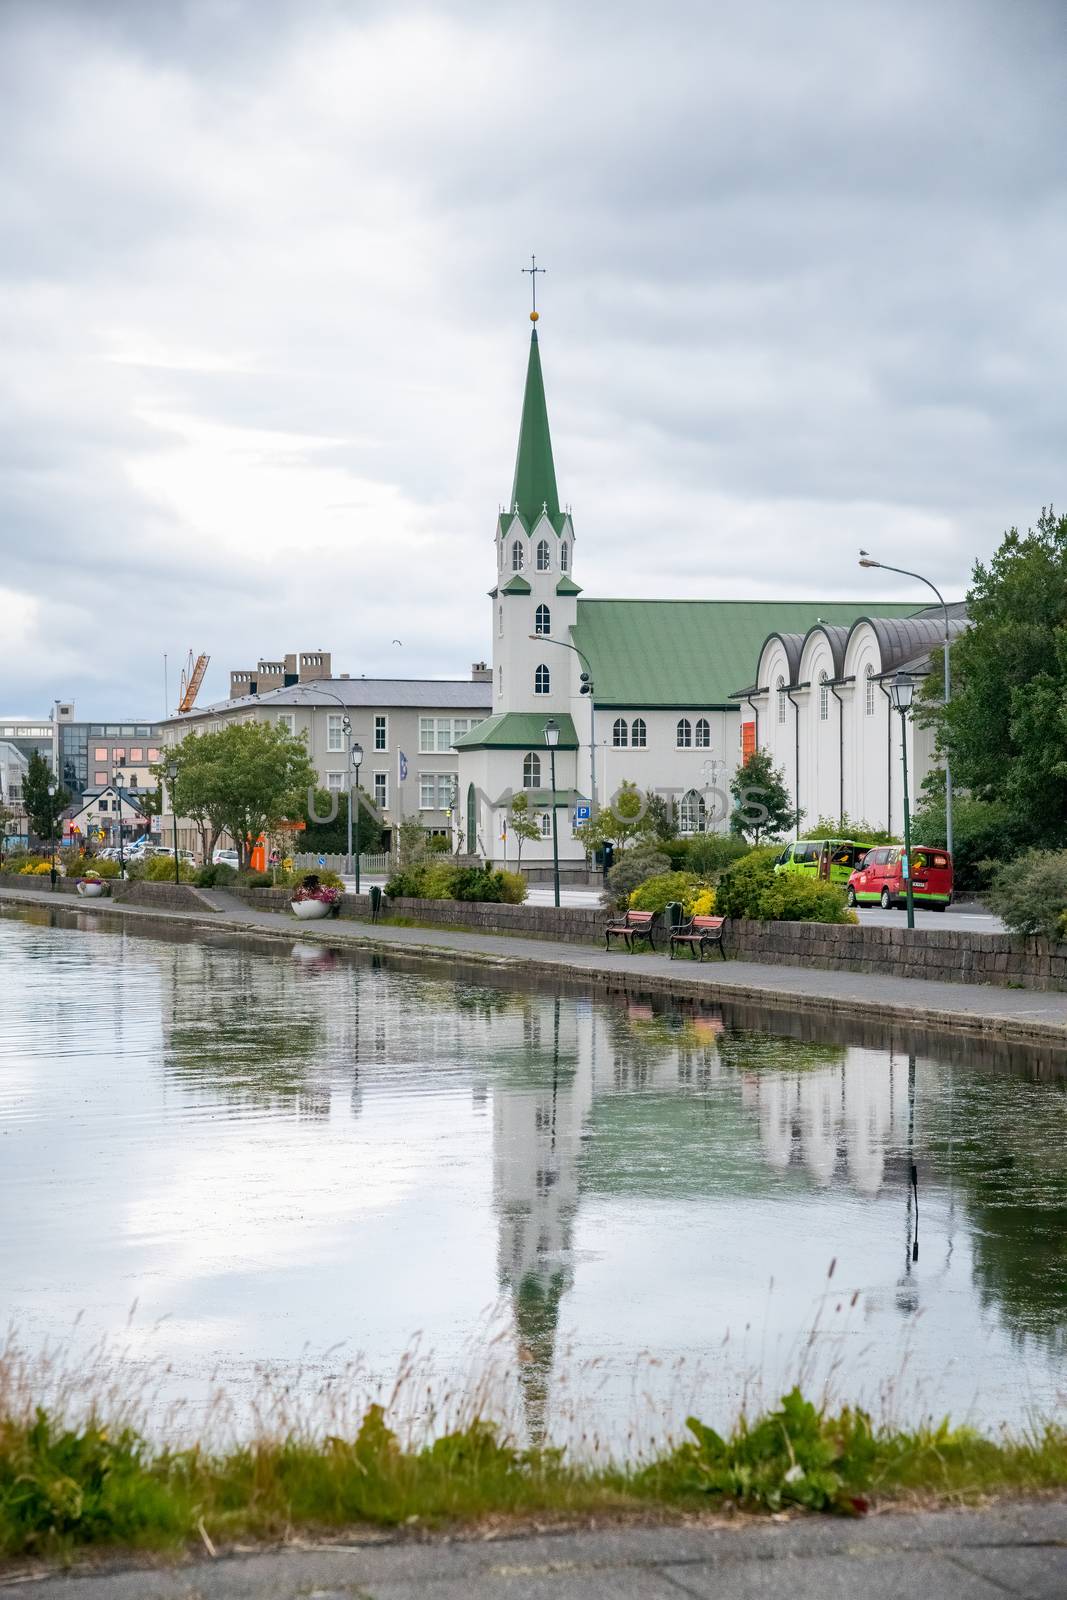 REYKJAVIK, ICELAND - AUGUST 11, 2019: Lake Tjornin with church on a cloudy summer day.